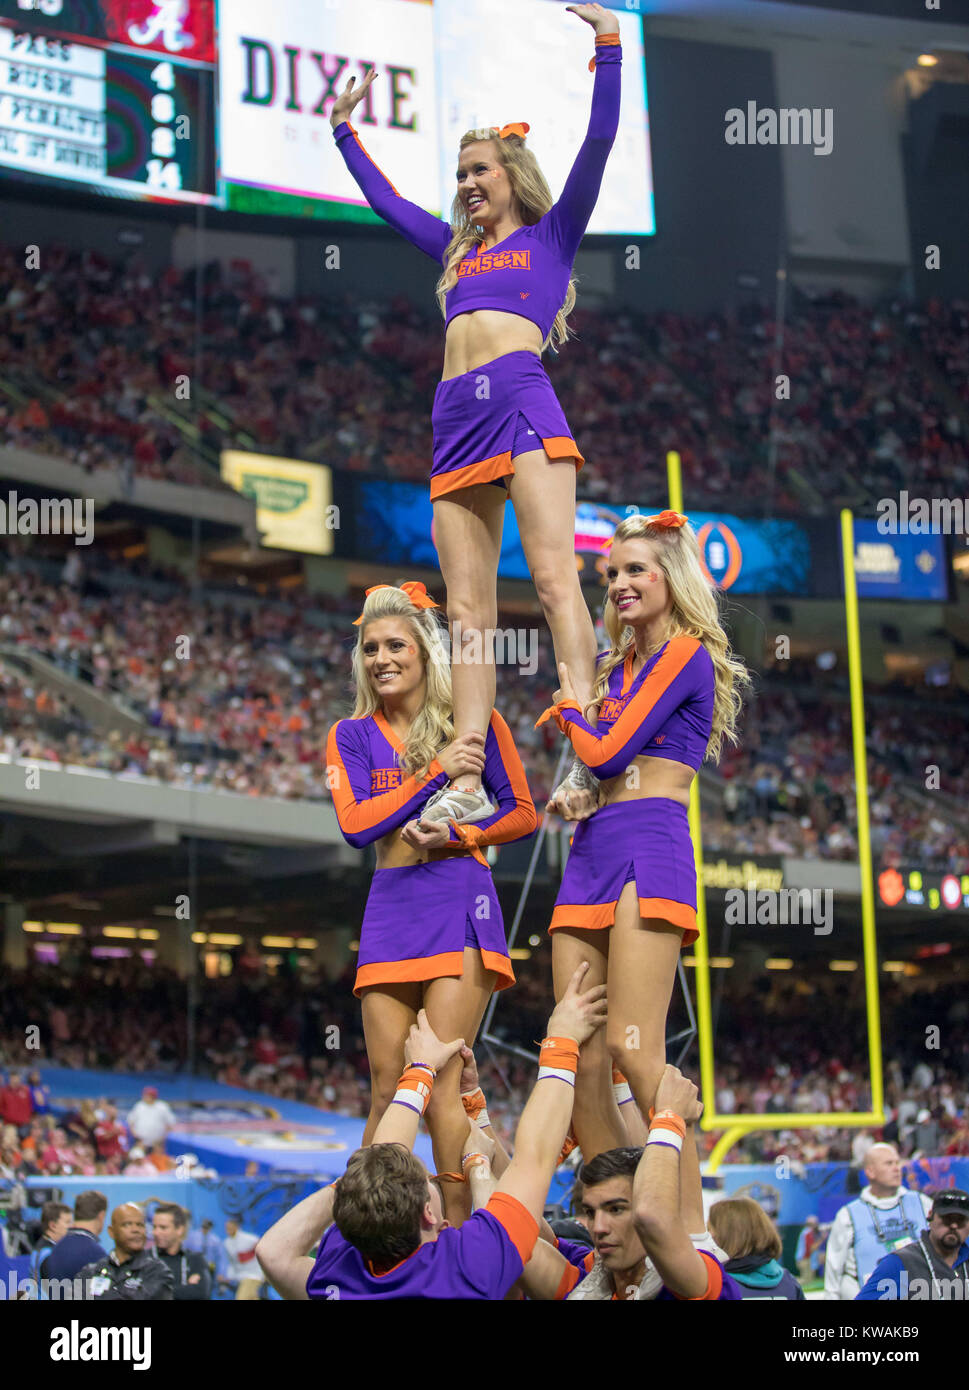 New Orleans, LA, USA. 1st Jan, 2018. The Clemson cheerleaders perform a pyramid stunt on the sidelines during the Allstate Sugar Bowl football game between the Clemson Tigers and the Alabama Crimson Tide at the Mercedes-Benz Supedome in New Orleans, LA. Kyle Okita/CSM/Alamy Live News Stock Photo